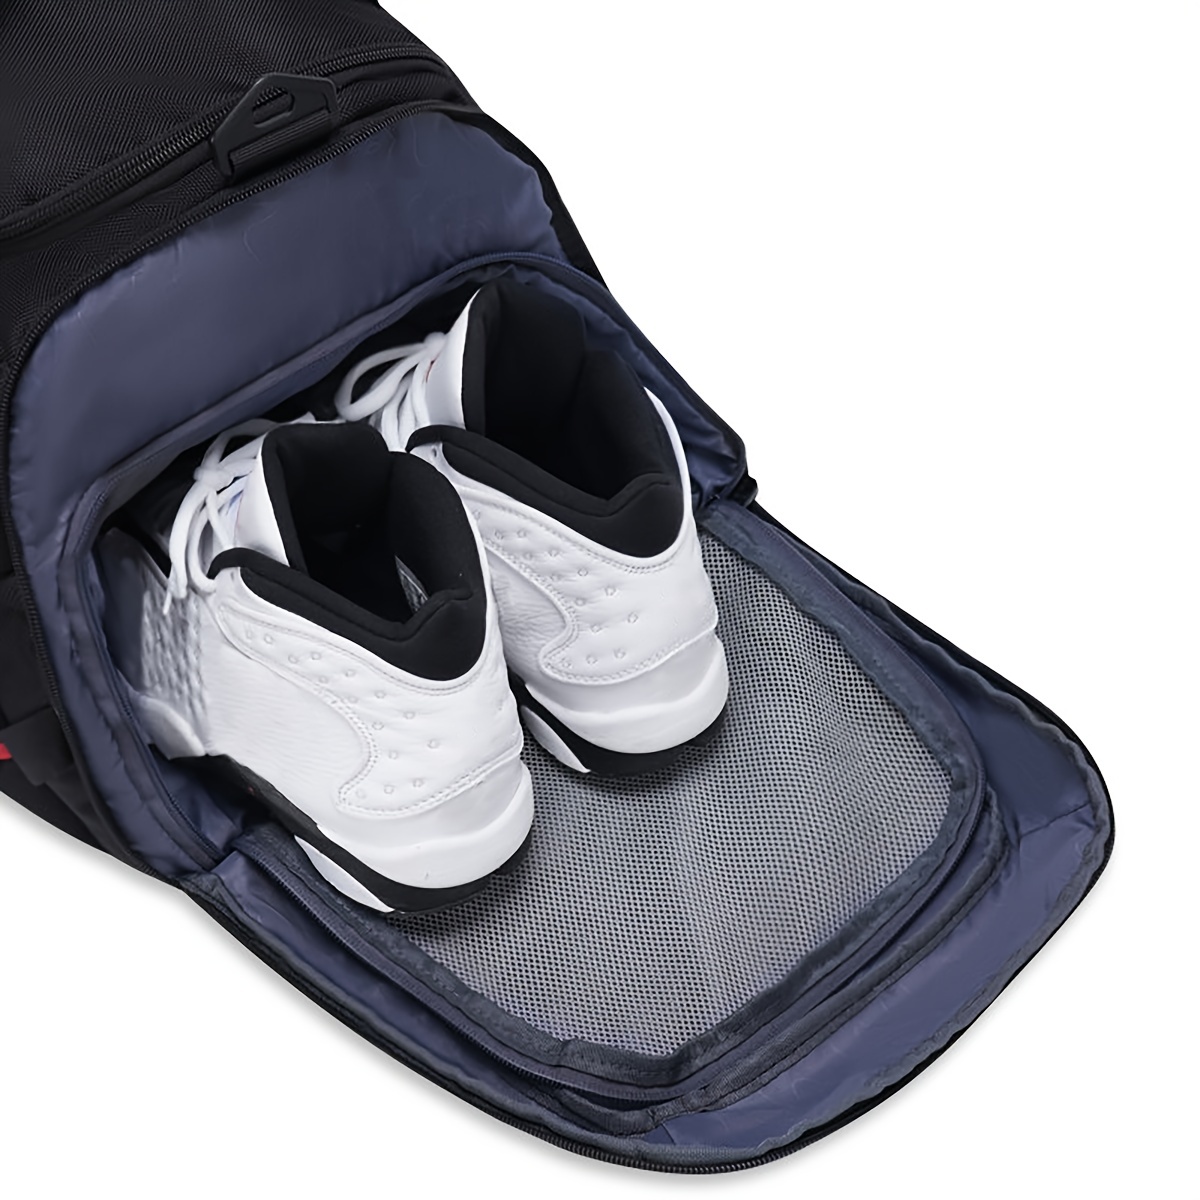 Gym Bag for Men Women - Sports Duffle bag Travel Backpack Weekender  Overnight Bag with Shoes Compartment Black